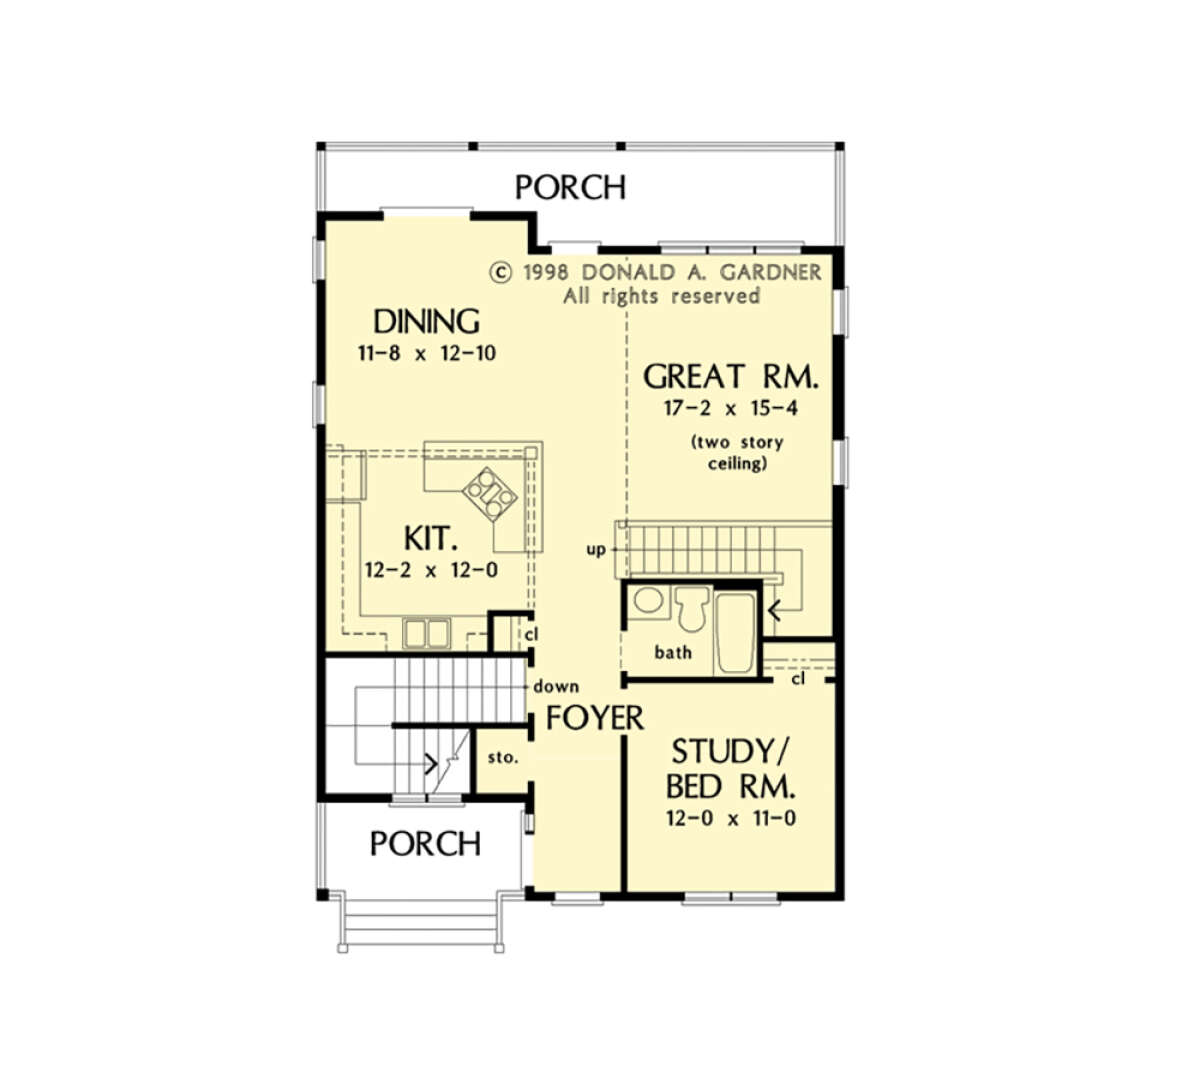 Main Floor w/ Basement Stair Location for House Plan #2865-00363